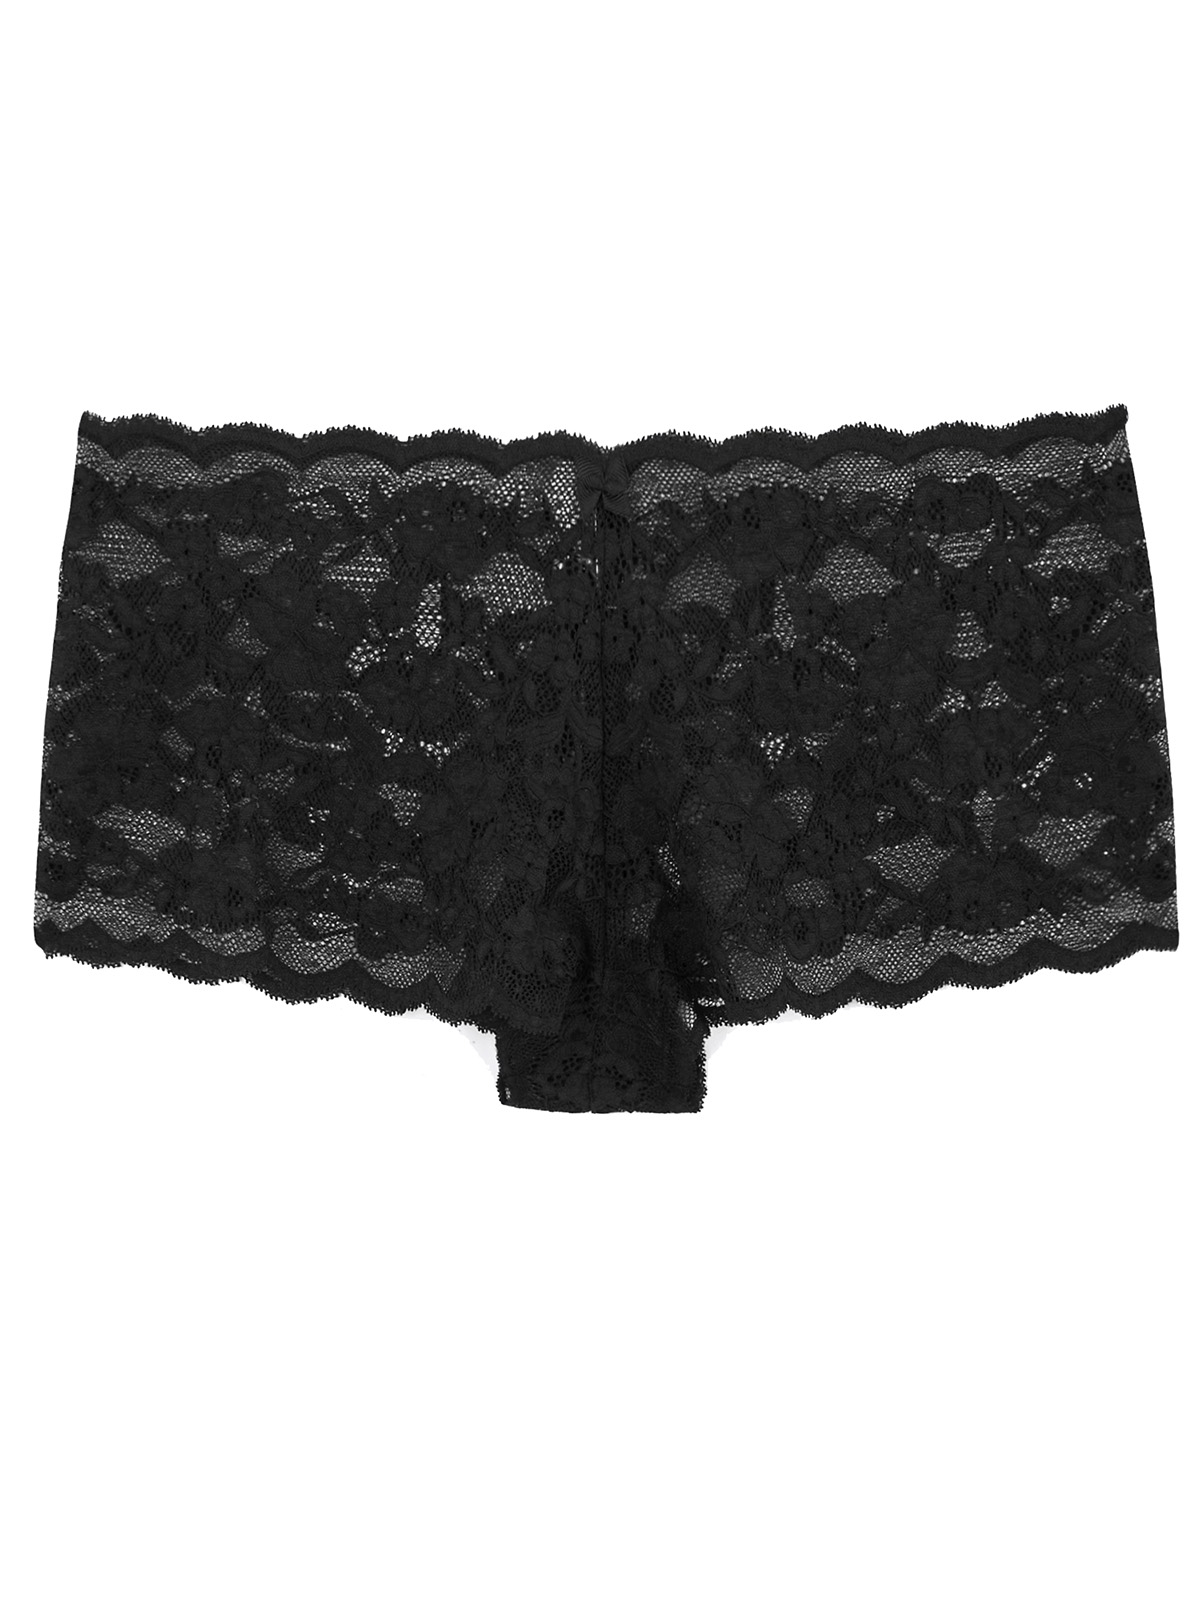 Marks and Spencer - - M&5 BLACK All Over Lace Shorts - Size 10 to 24